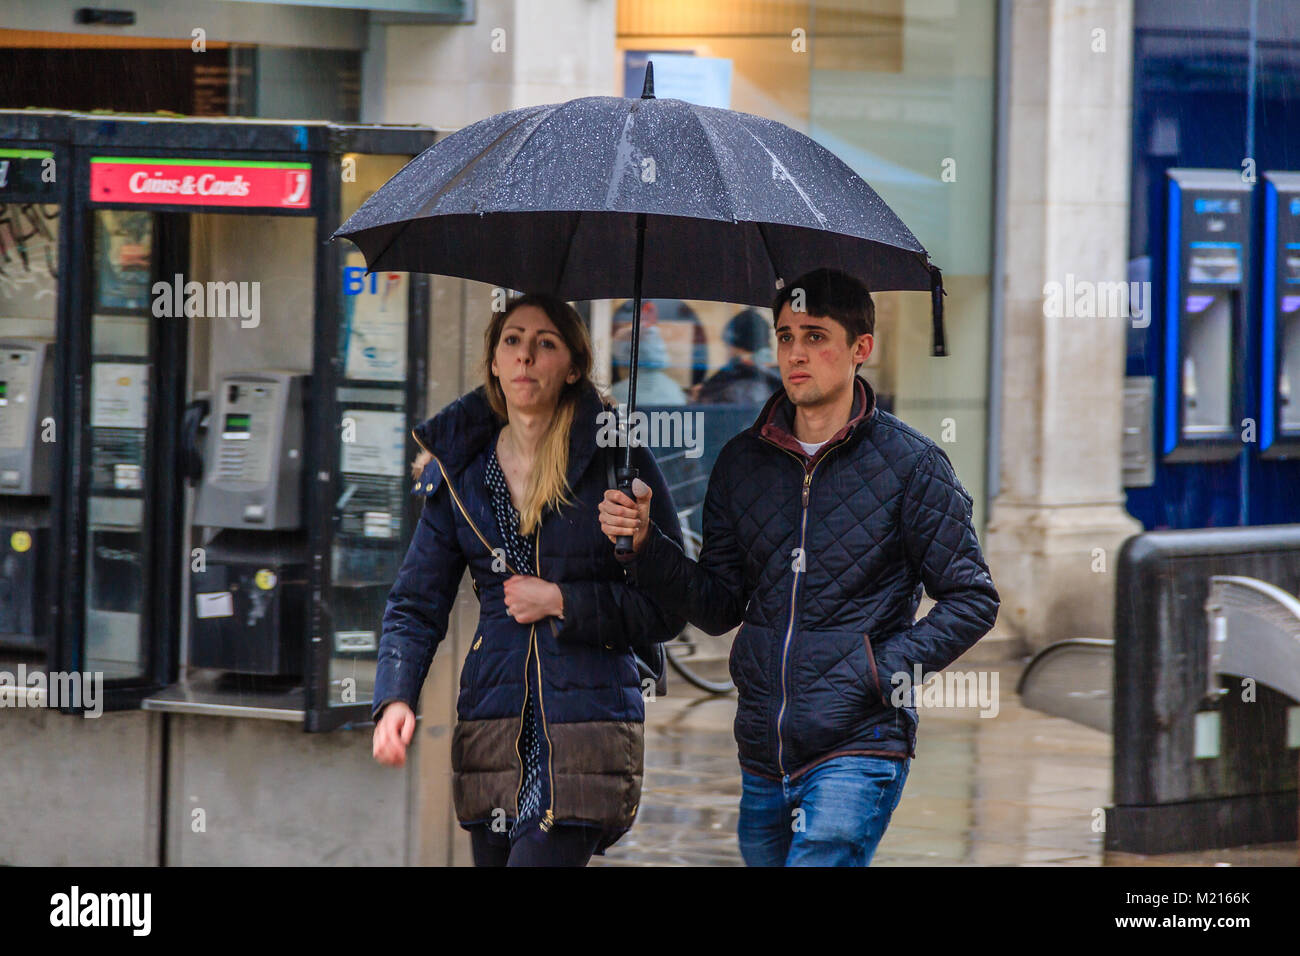 Oxford, UK. 3rd February, 2018.  Rainy Day for shoppers & tourists in Oxford, Oxfordshire, UK. Credit: JHNews / Alamy Live News Stock Photo